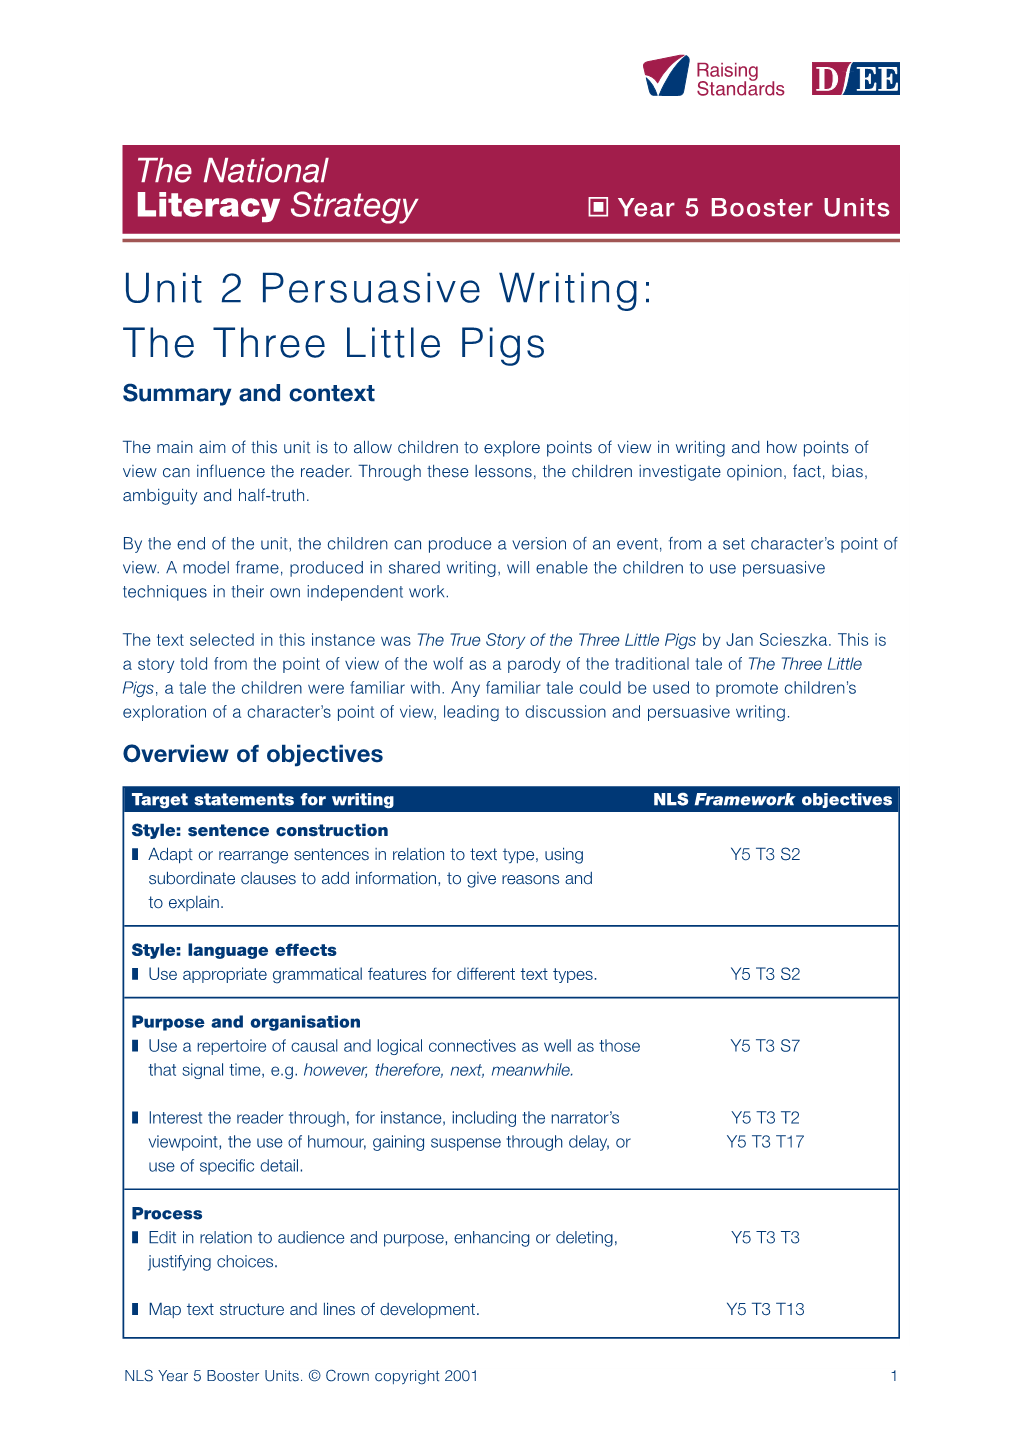 Unit 2 Persuasive Writing: the Three Little Pigs Summary and Context